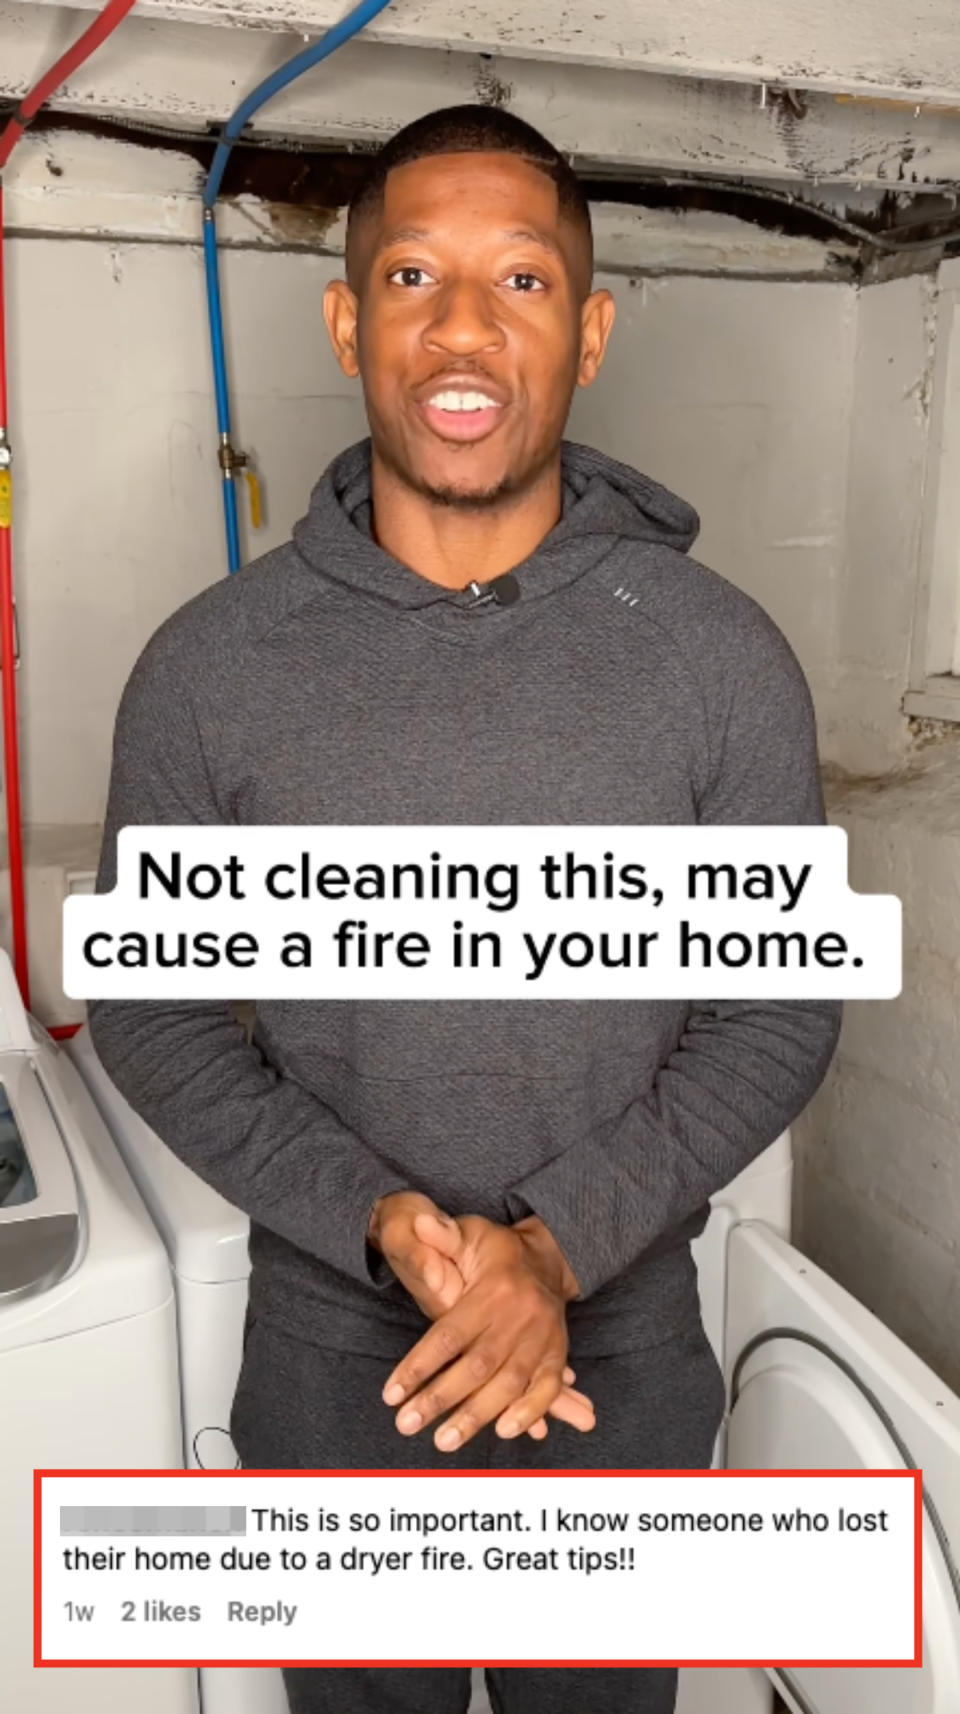 Kyshawn saying "Not cleaning this may cause a fire in your home" and standing in front of a washing machine